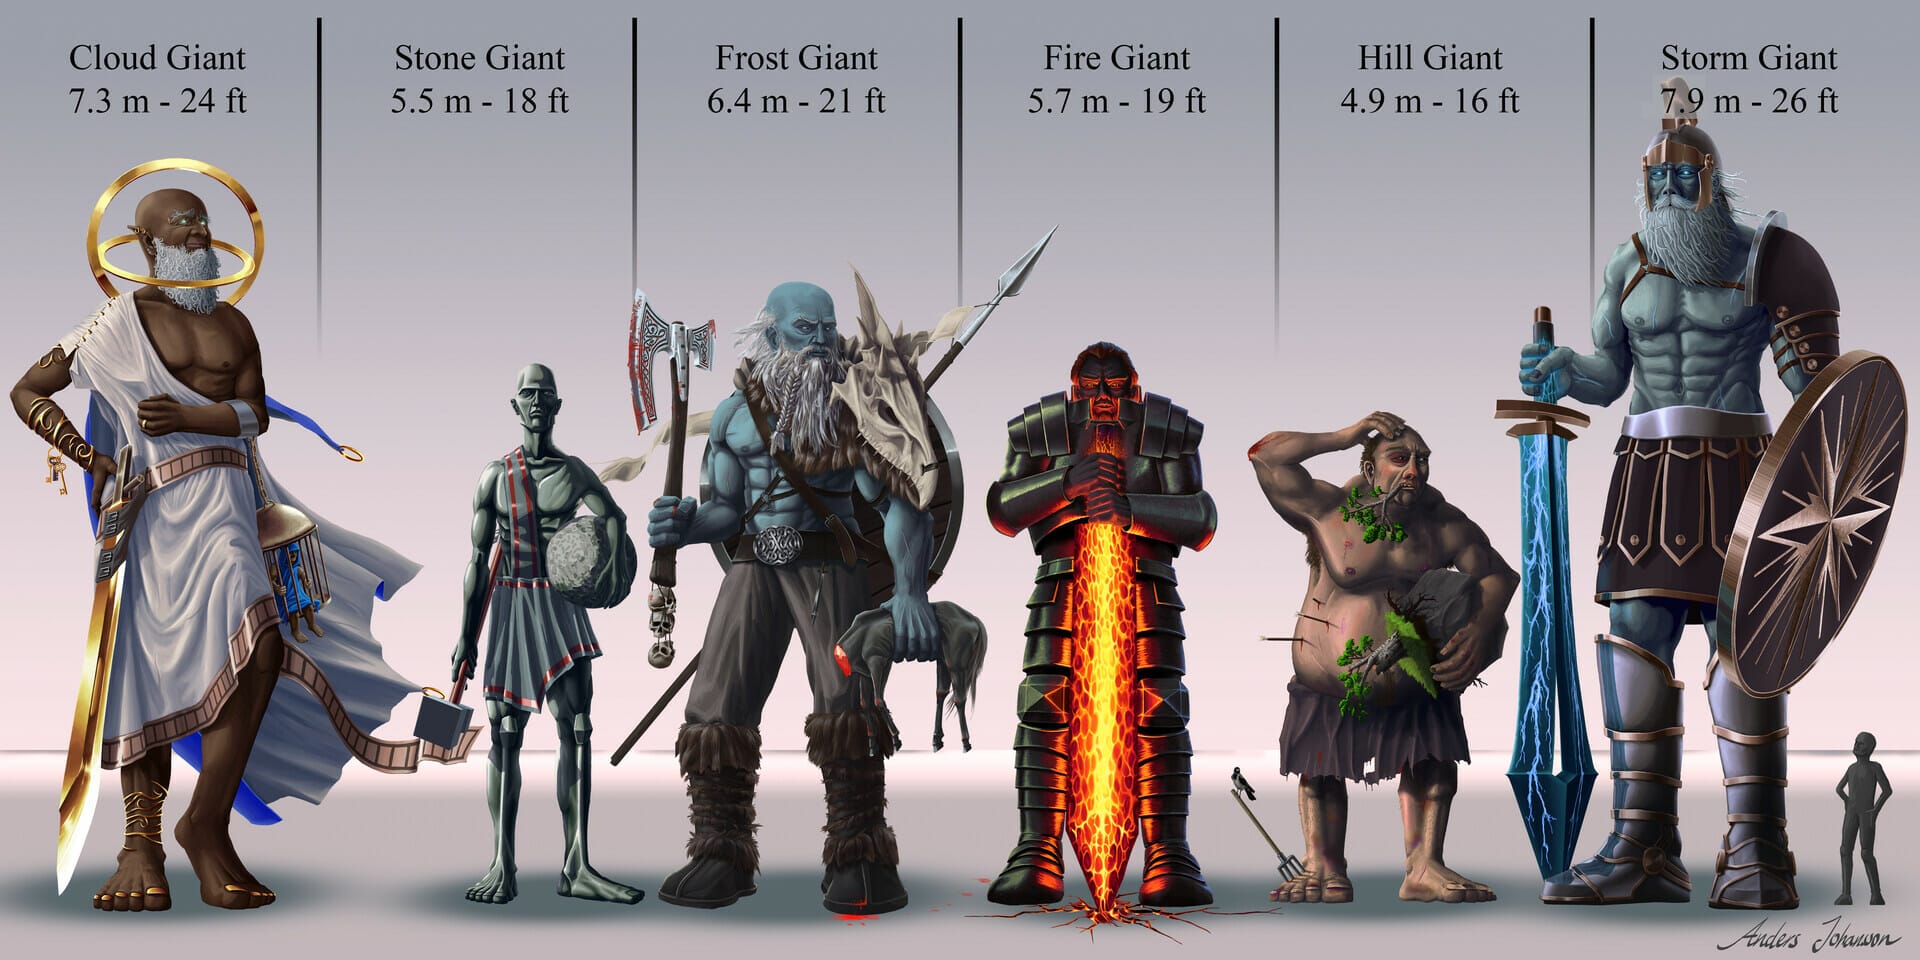 What Height is Giant? 